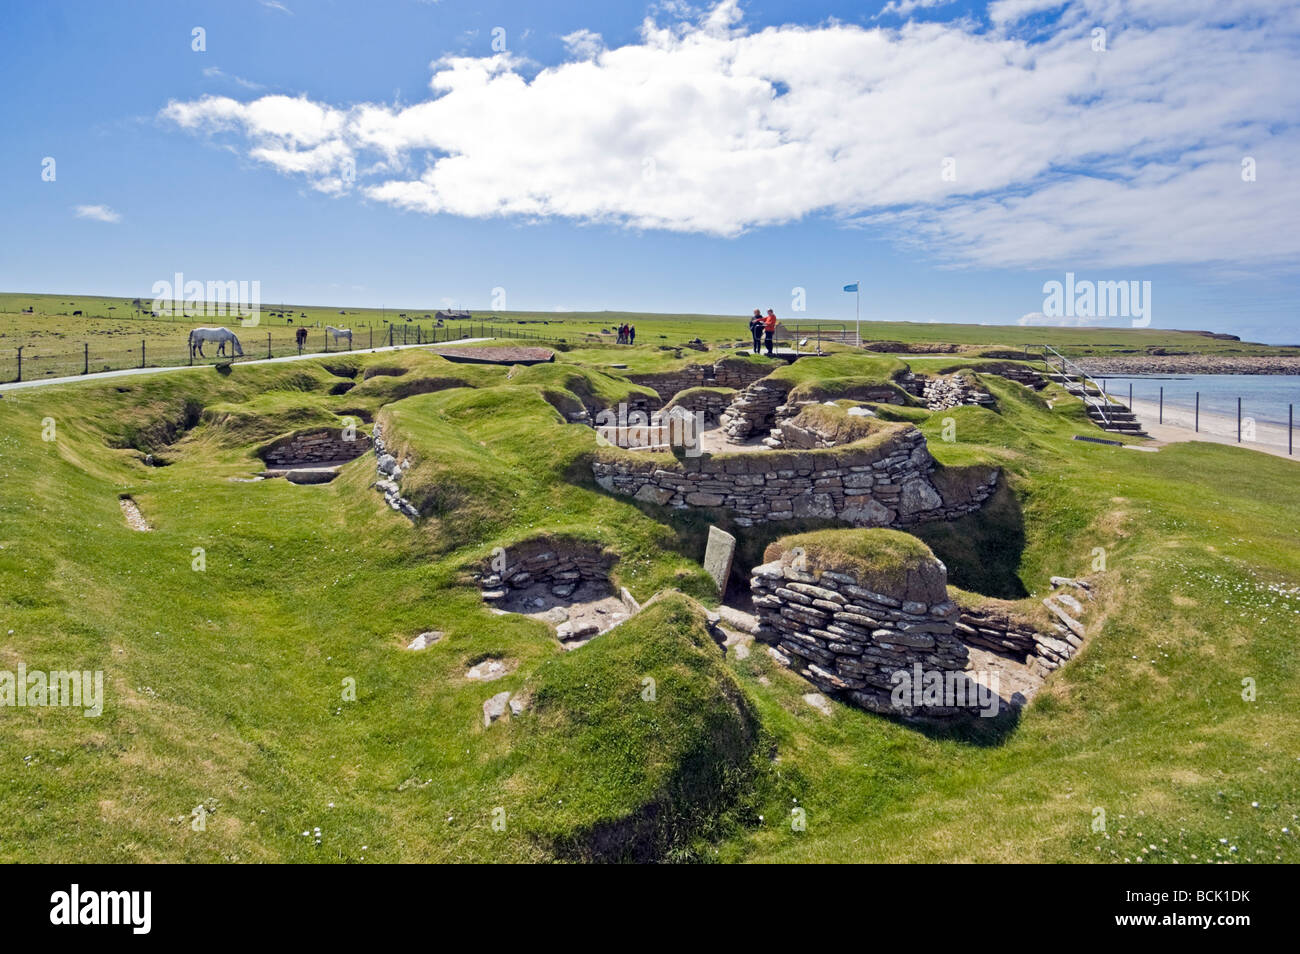 The neolithic village of Skara Brae on Orkney mainland Scotland with ten stone age houses dating from around 3000 years BC Stock Photo